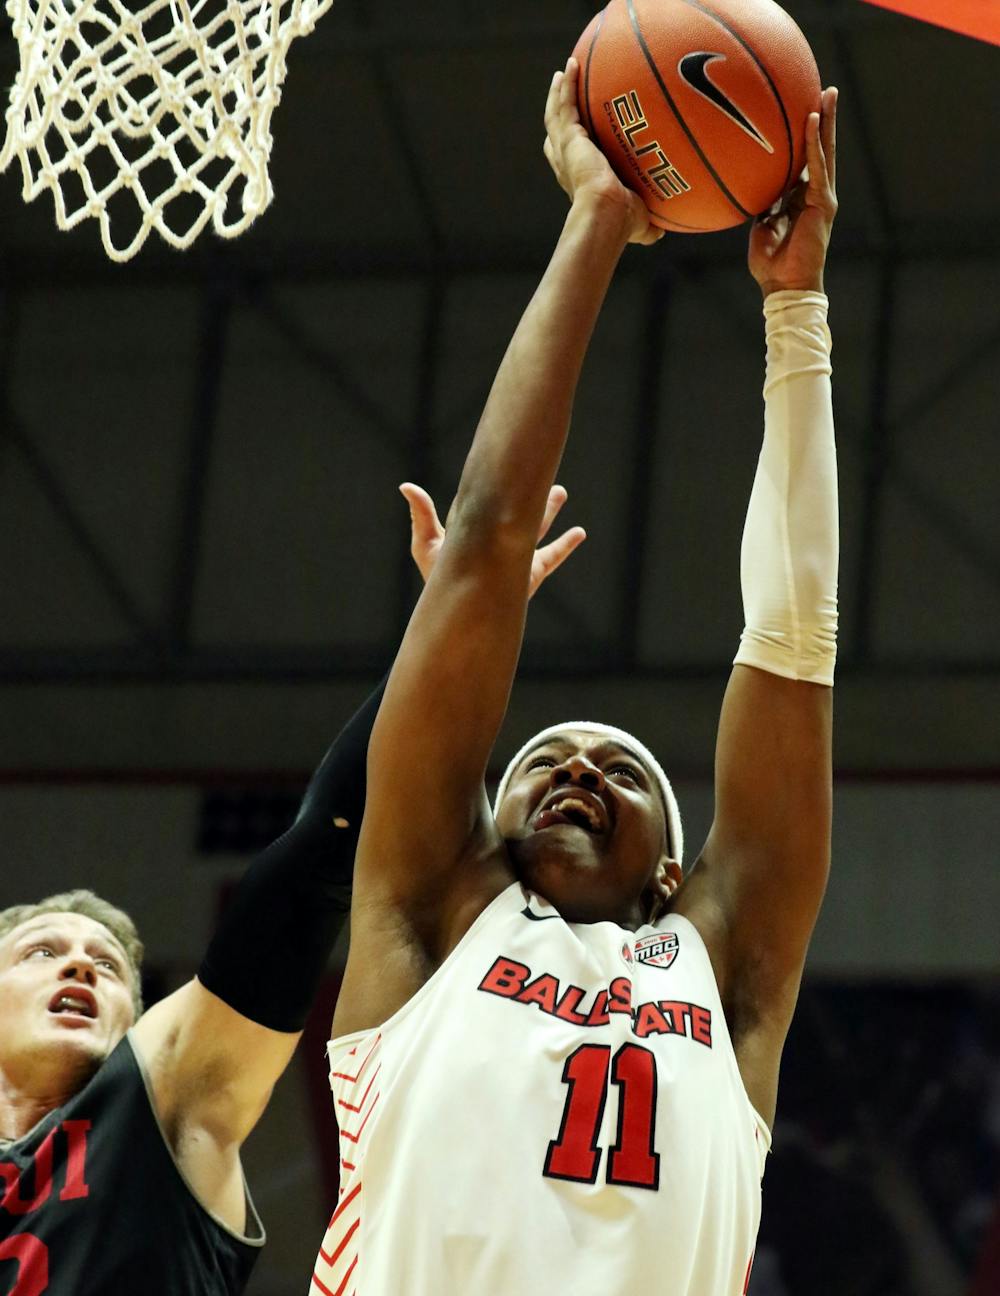 <p>Ball State redshirt freshman guard Jarron Coleman shoots a layup while being guarded by IUPUI junior guard Grant Weatherford during the Cardinals' game against the Jaguars Dec. 7, 2019, at John E. Worthen Arena, Coleman was the Cardinals leading scorer with 20 points. <strong>Paige Grider, DN&nbsp;</strong></p>